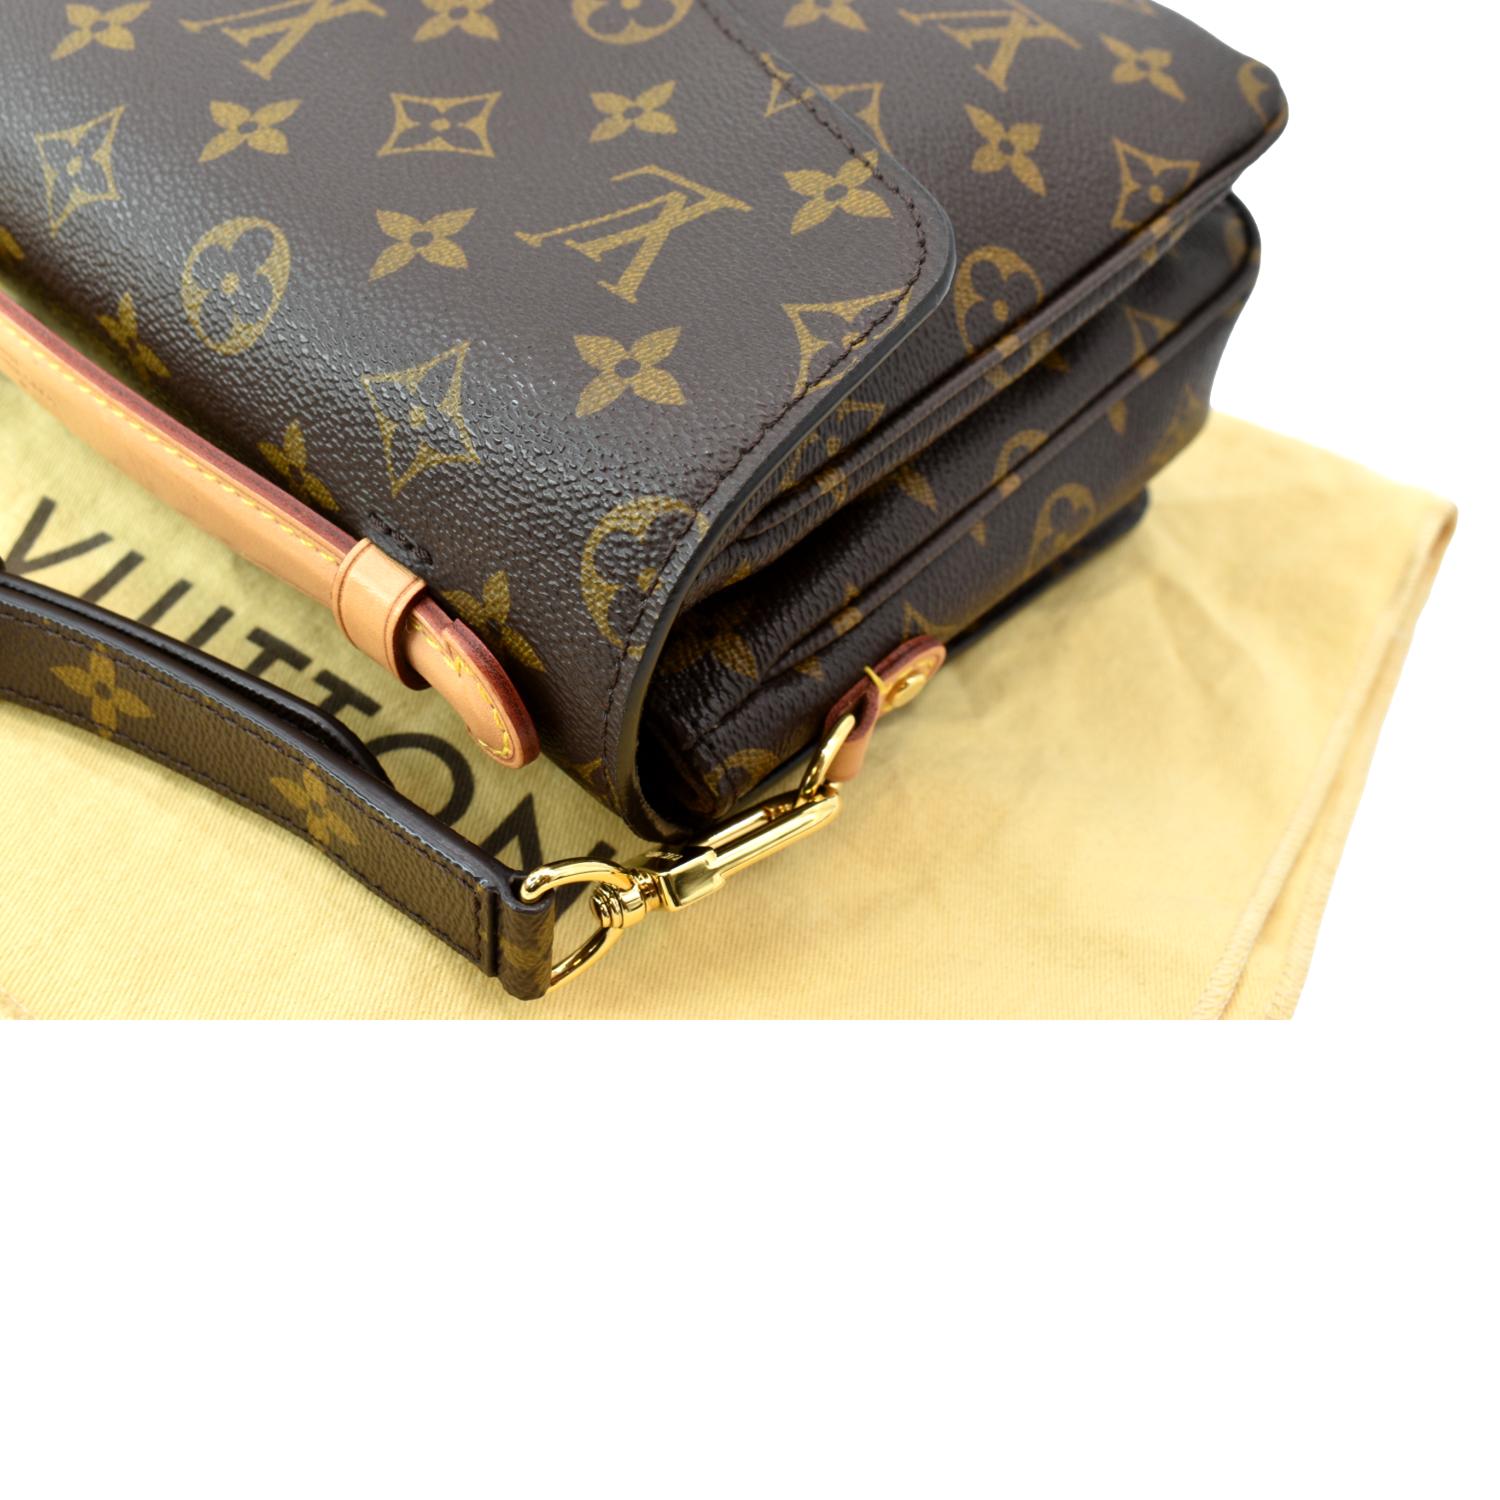 Metis leather crossbody bag Louis Vuitton Brown in Leather - 35779472